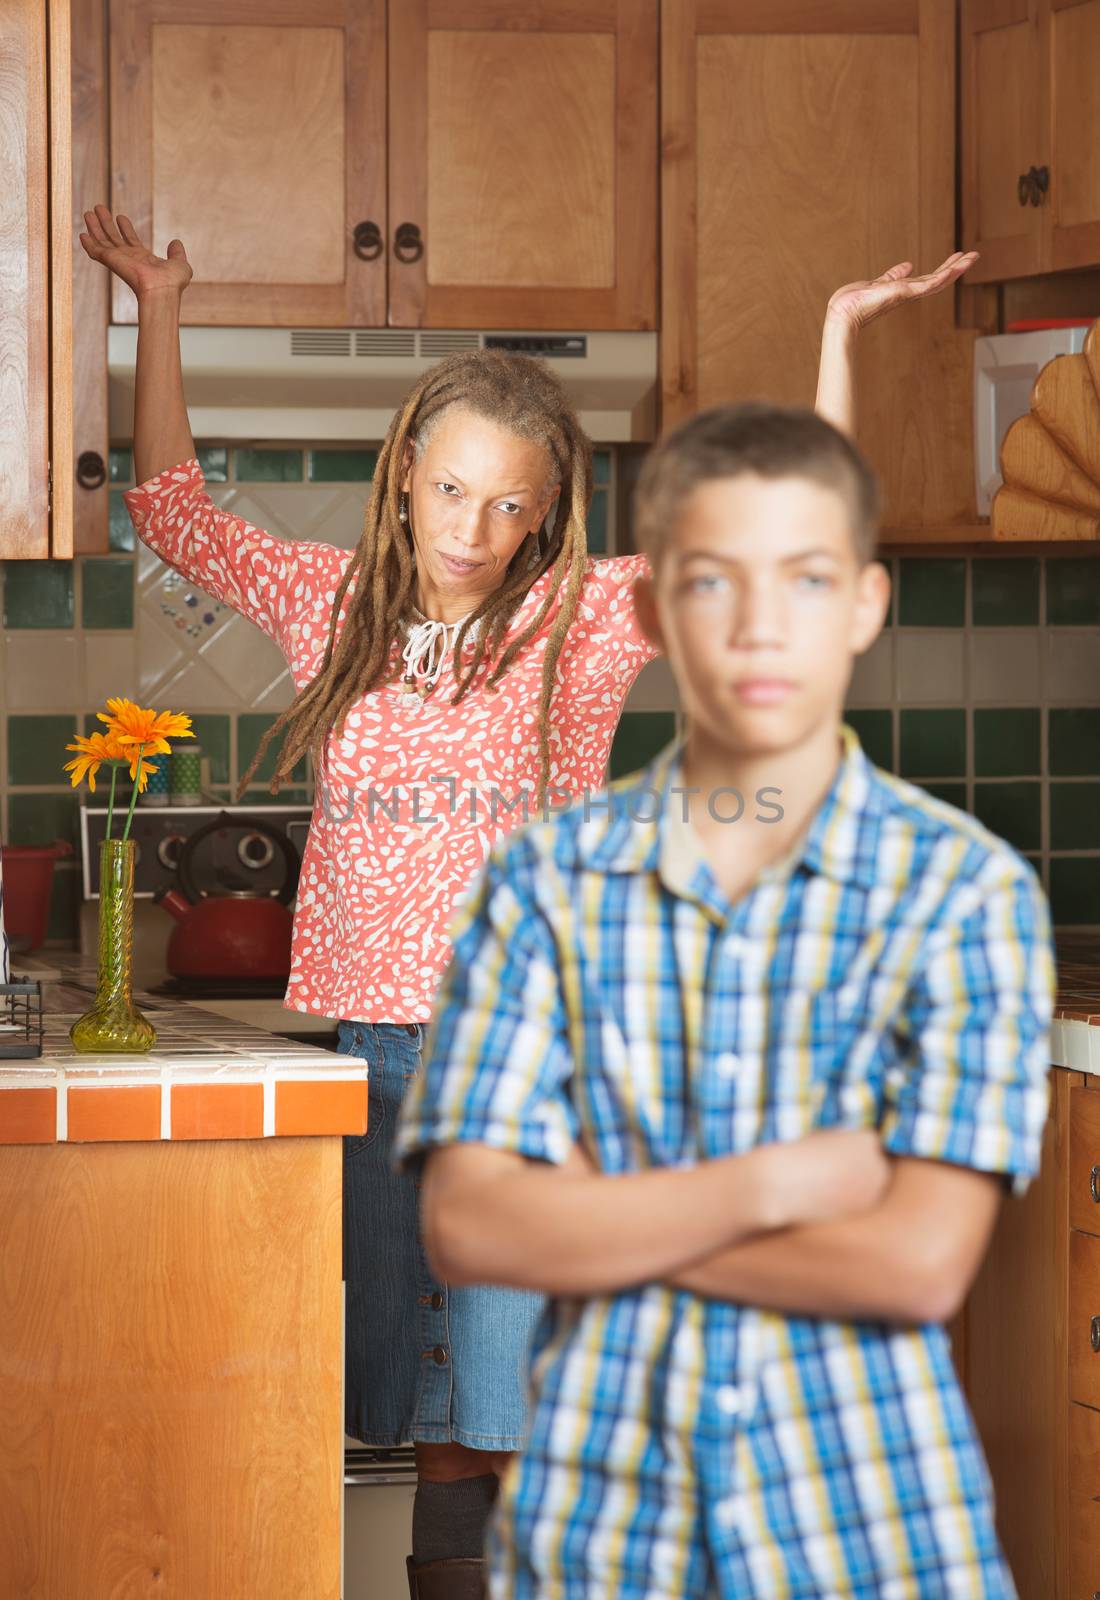 Mother of teenaged son throws her hands up in frustration as they both stand in the kitchen